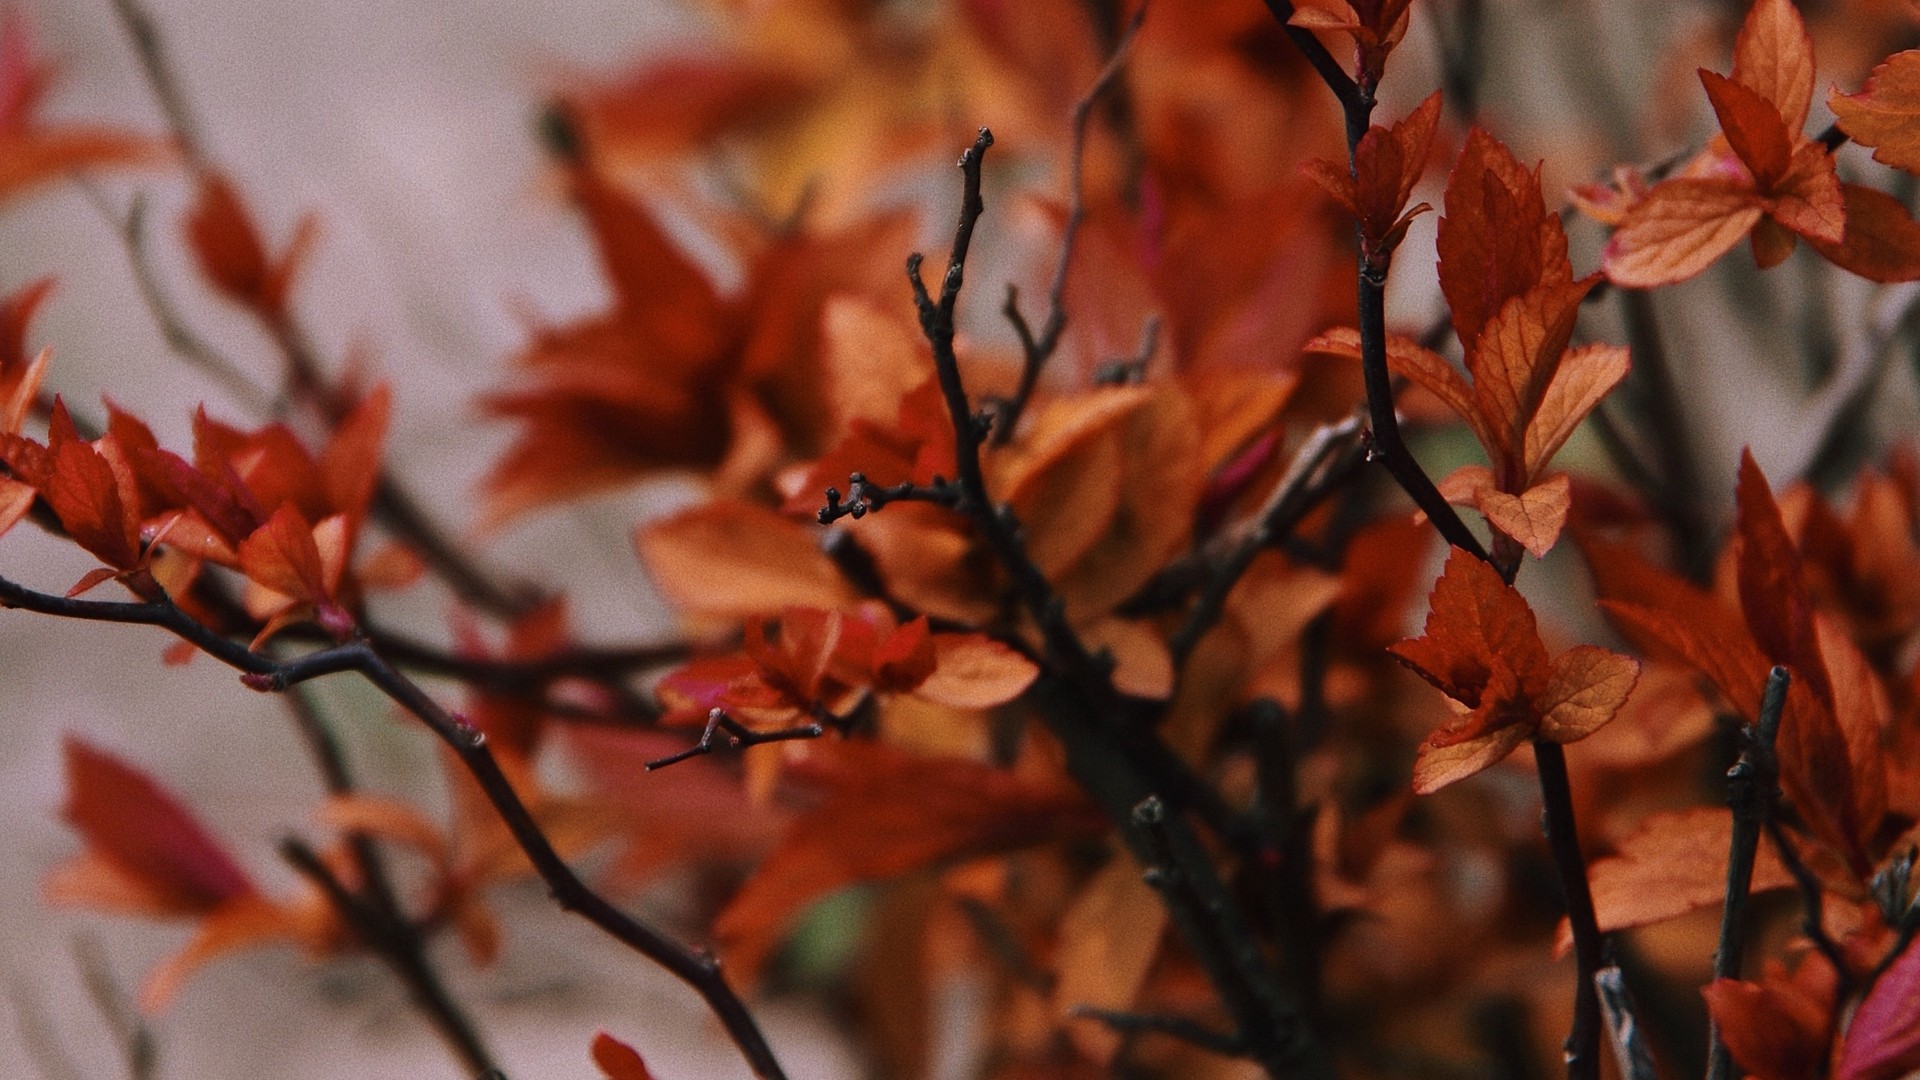 1920x1080 wallpapers: branches, leaves, plant, bush (image)